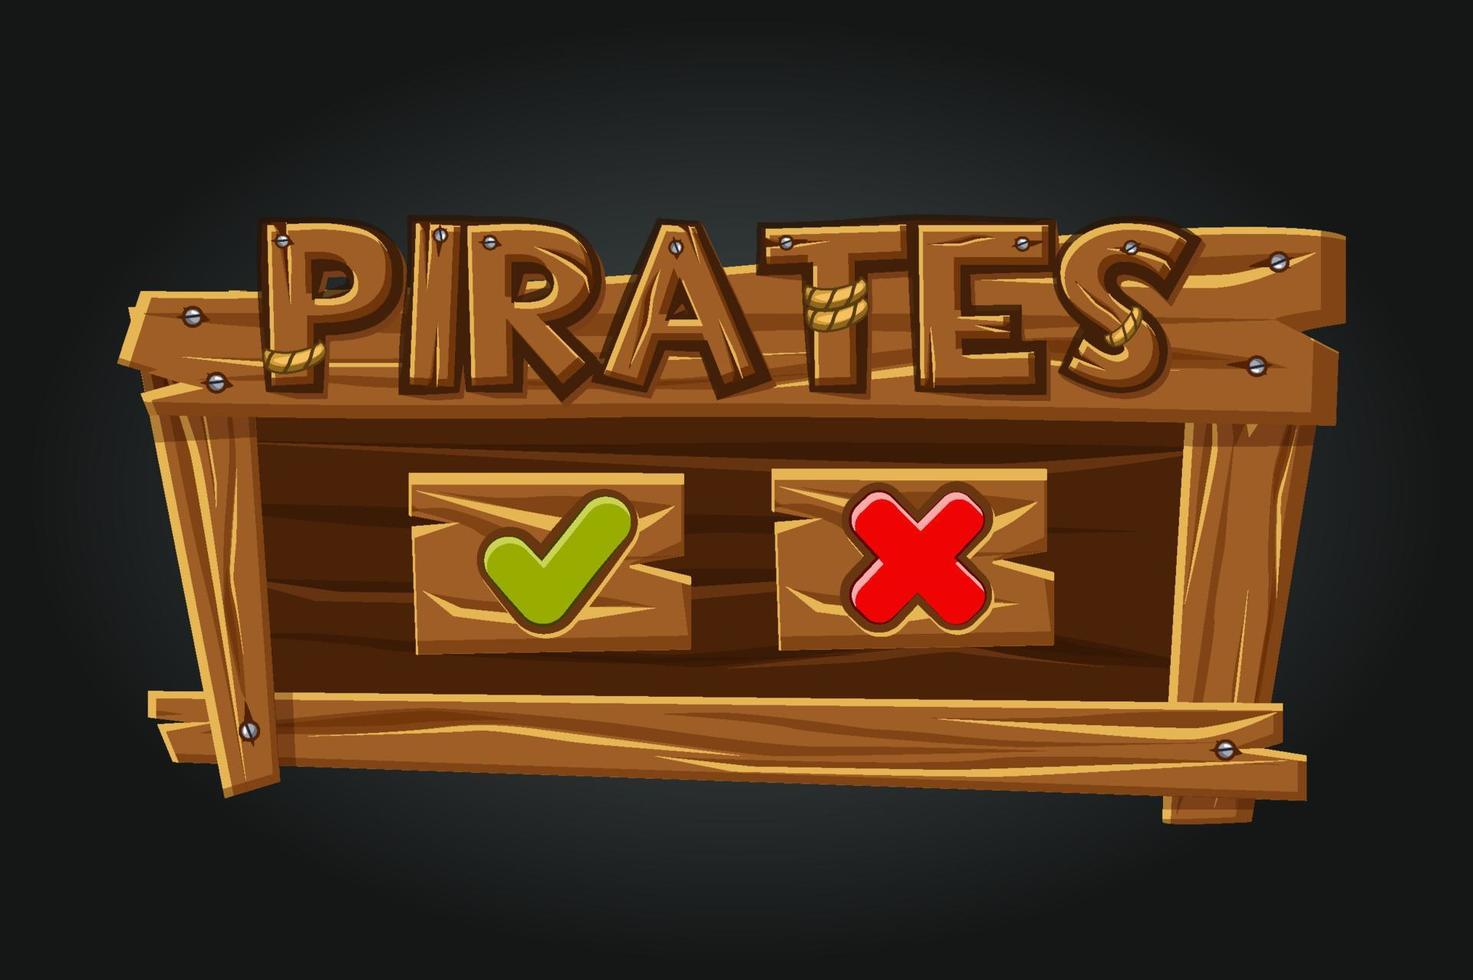 Game Pirates user interface play window. Buttons yes and closes. Wooden interface with pirates logo. vector